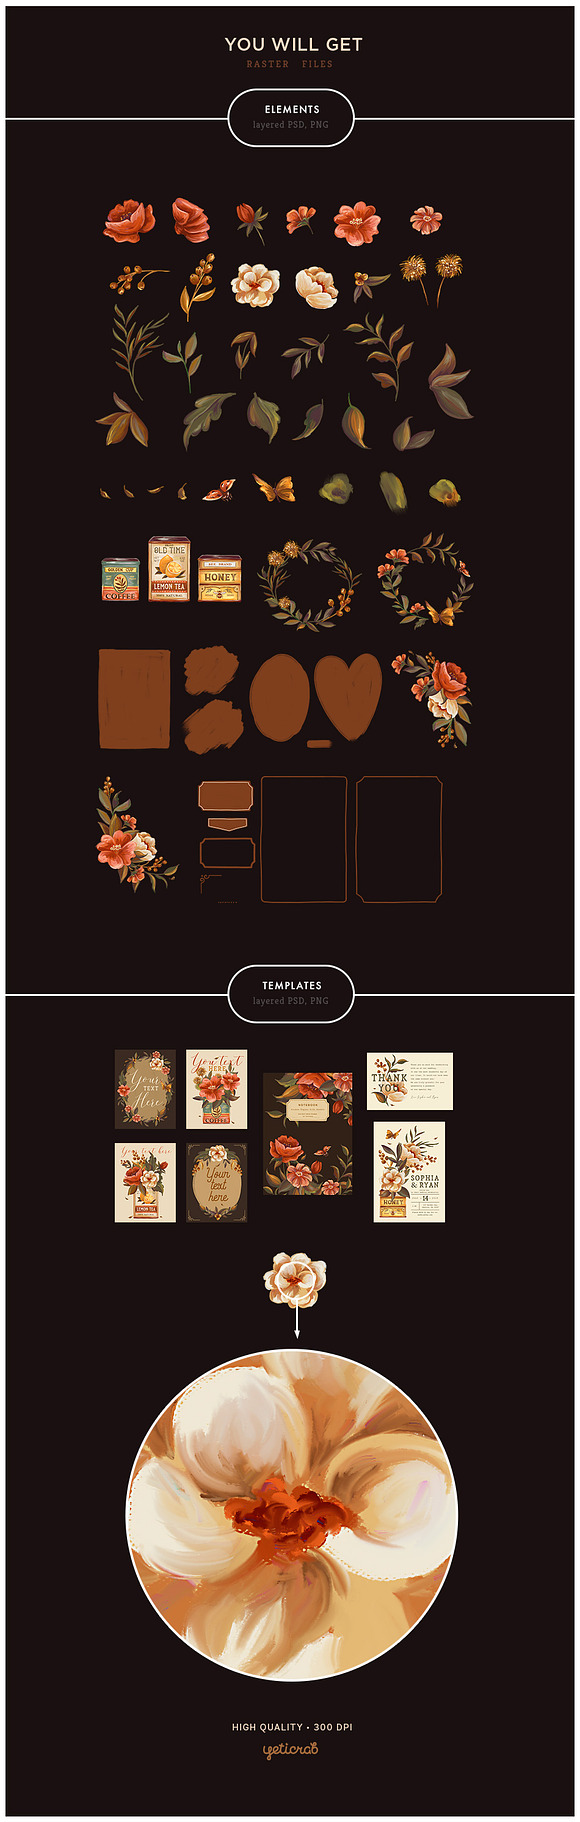 Vintage Tins & Flowers Graphic Set in Illustrations - product preview 11